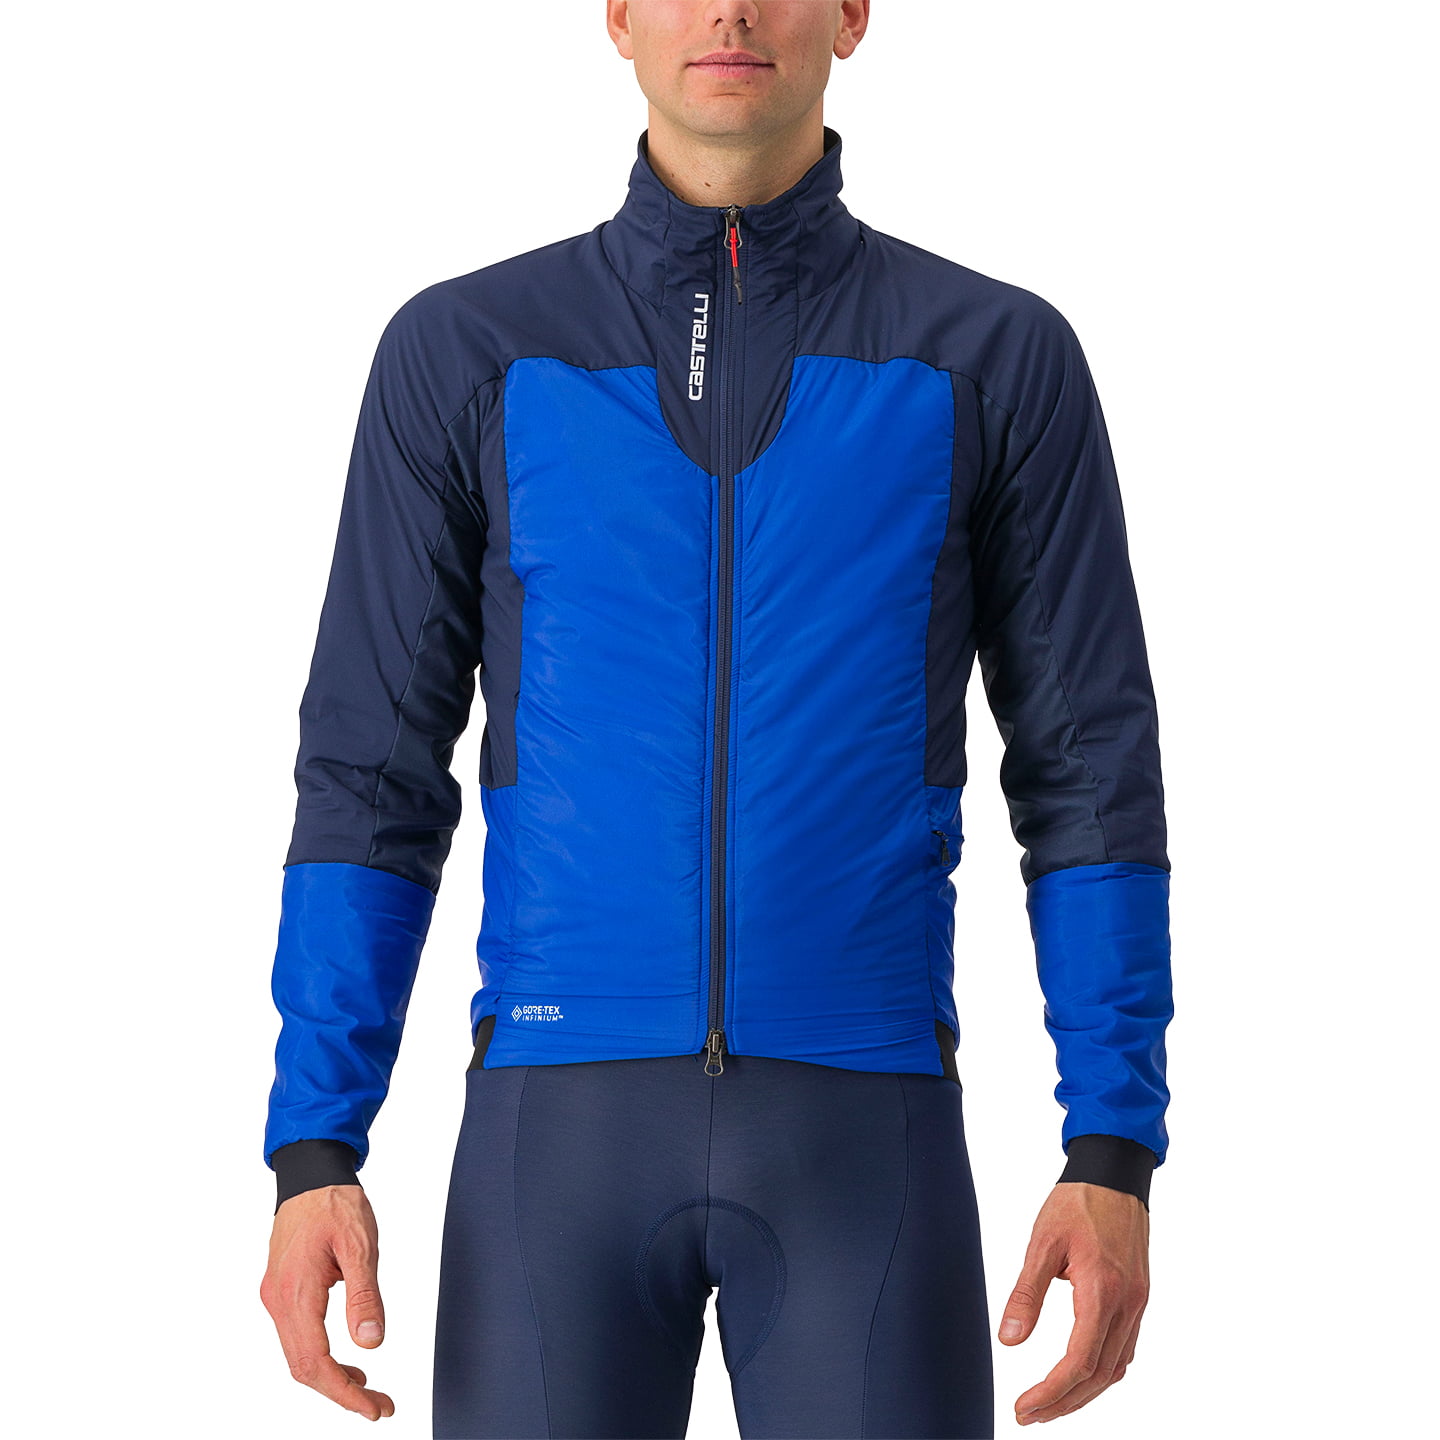 CASTELLI Winter Jacket Fly Thermal Thermal Jacket, for men, size 2XL, Winter jacket, Cycling clothing